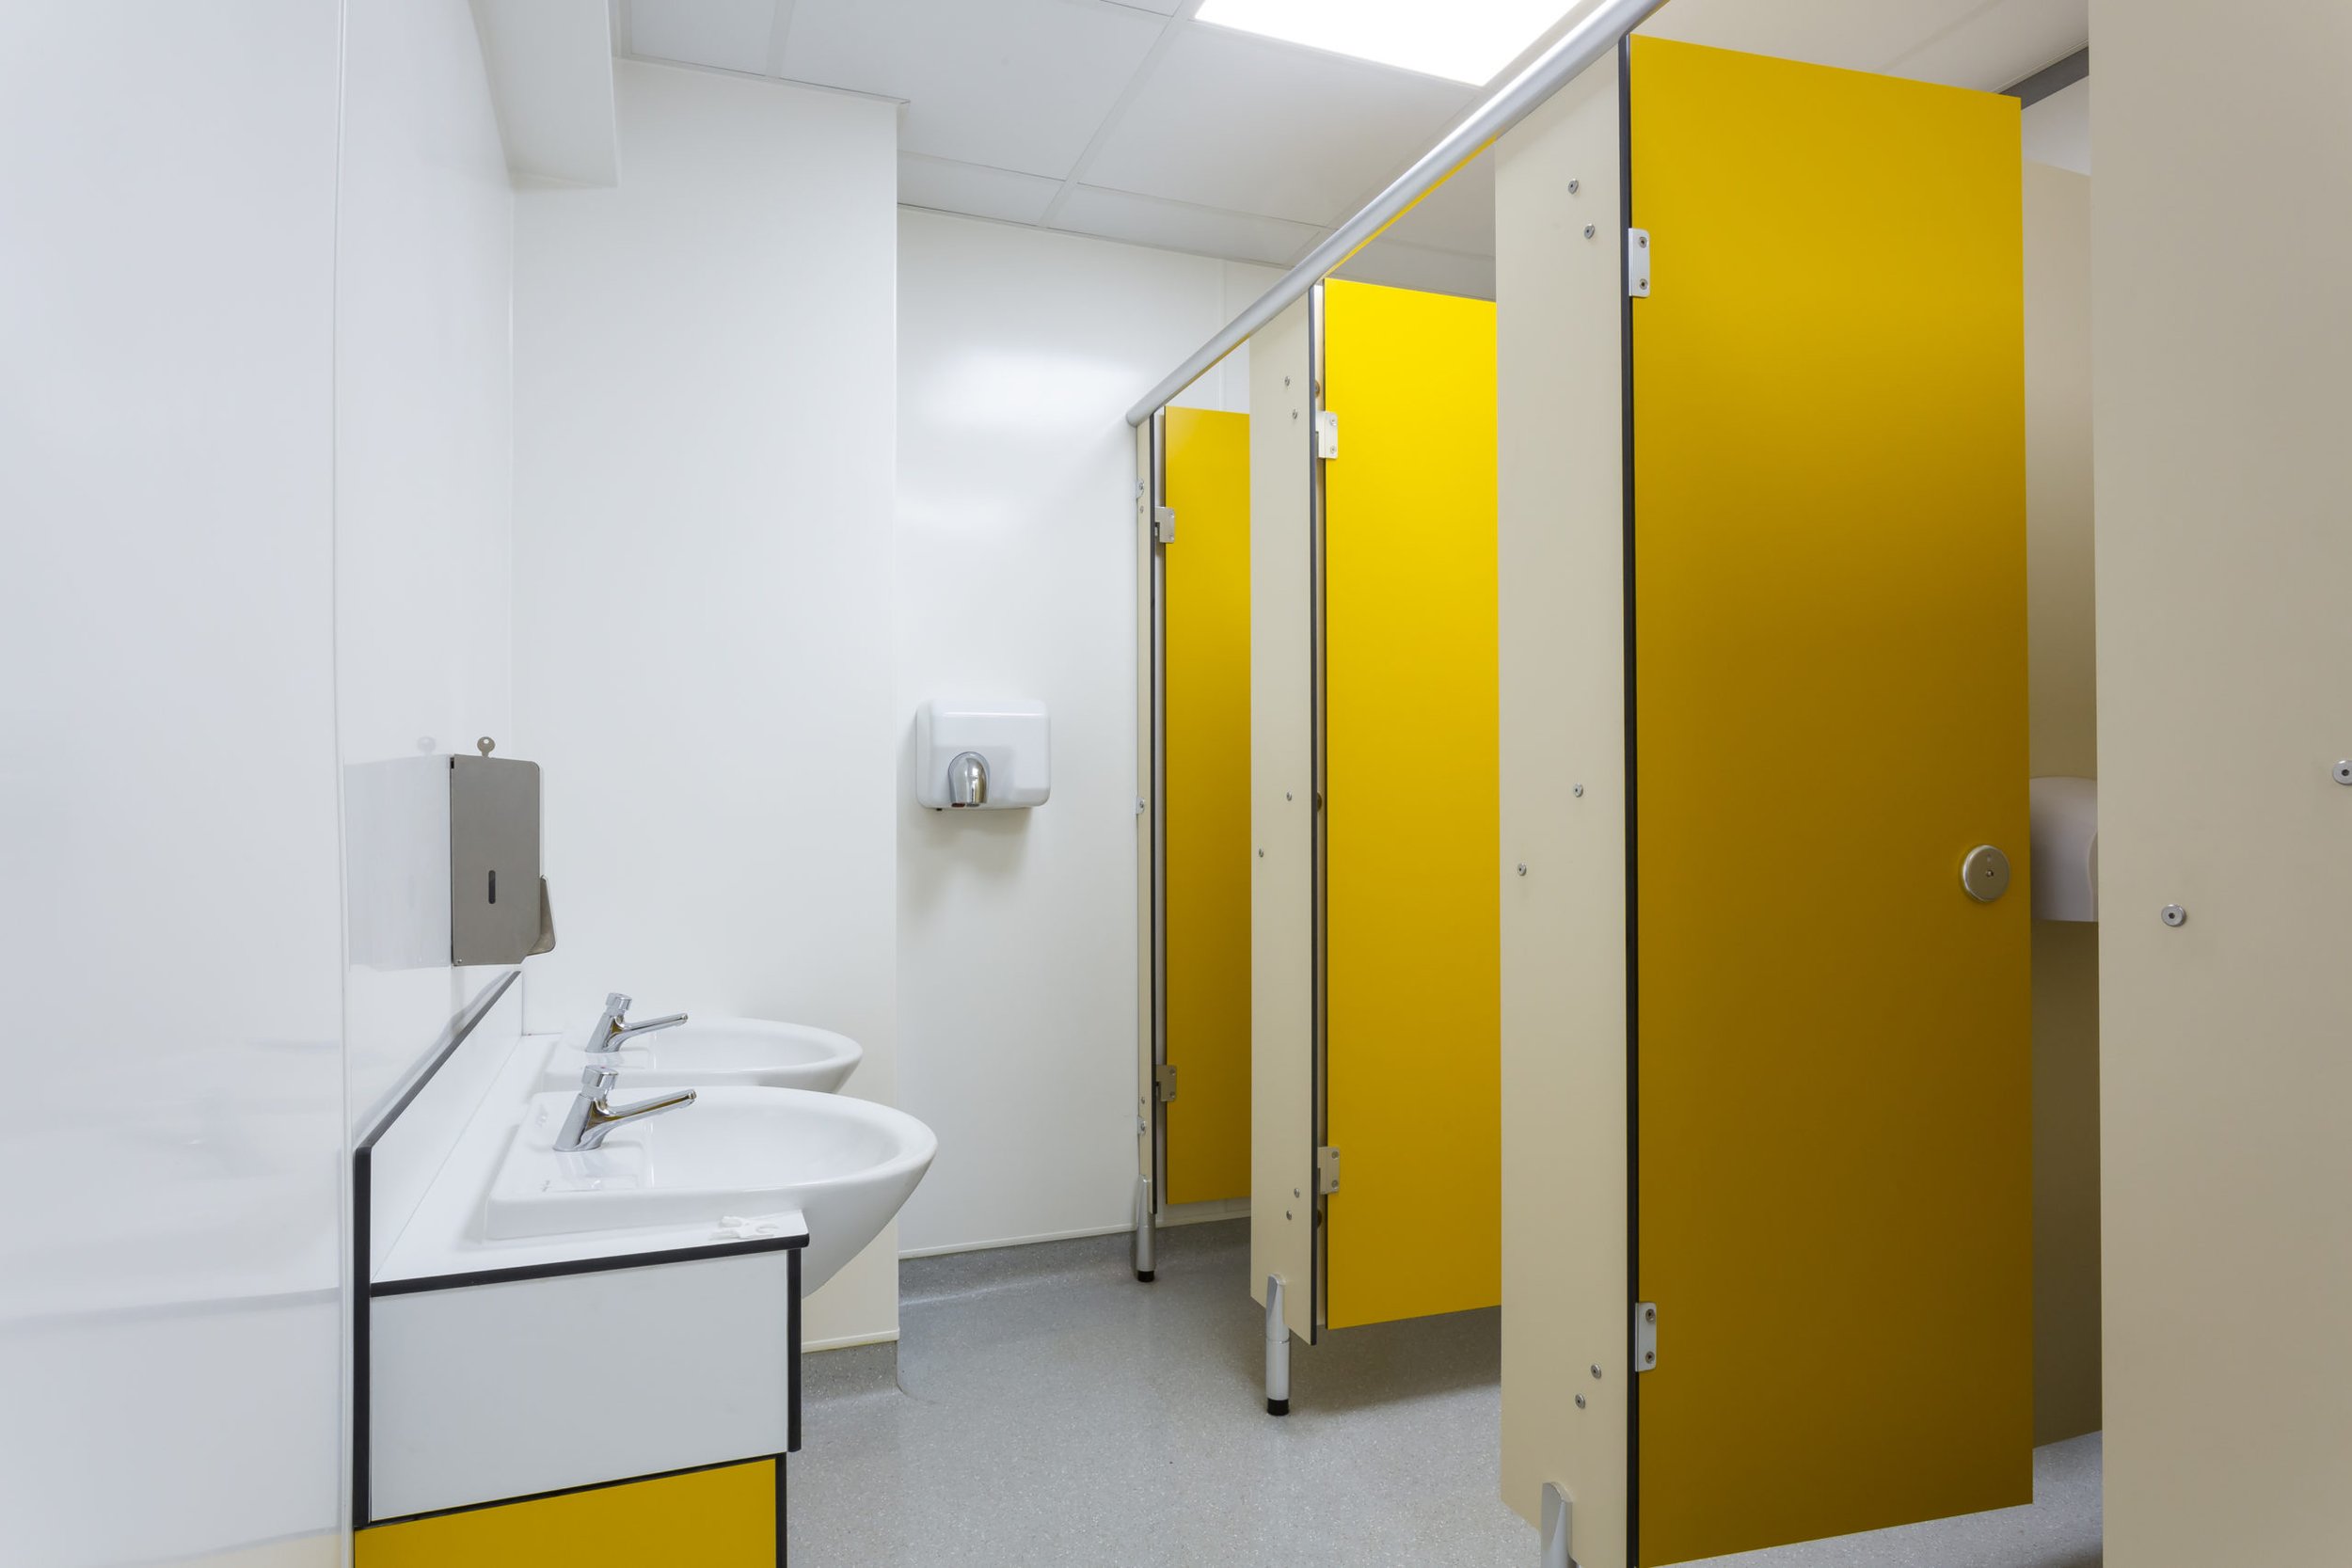 yellow and white toilets and vanity unit and sinks at cliff park school.jpg